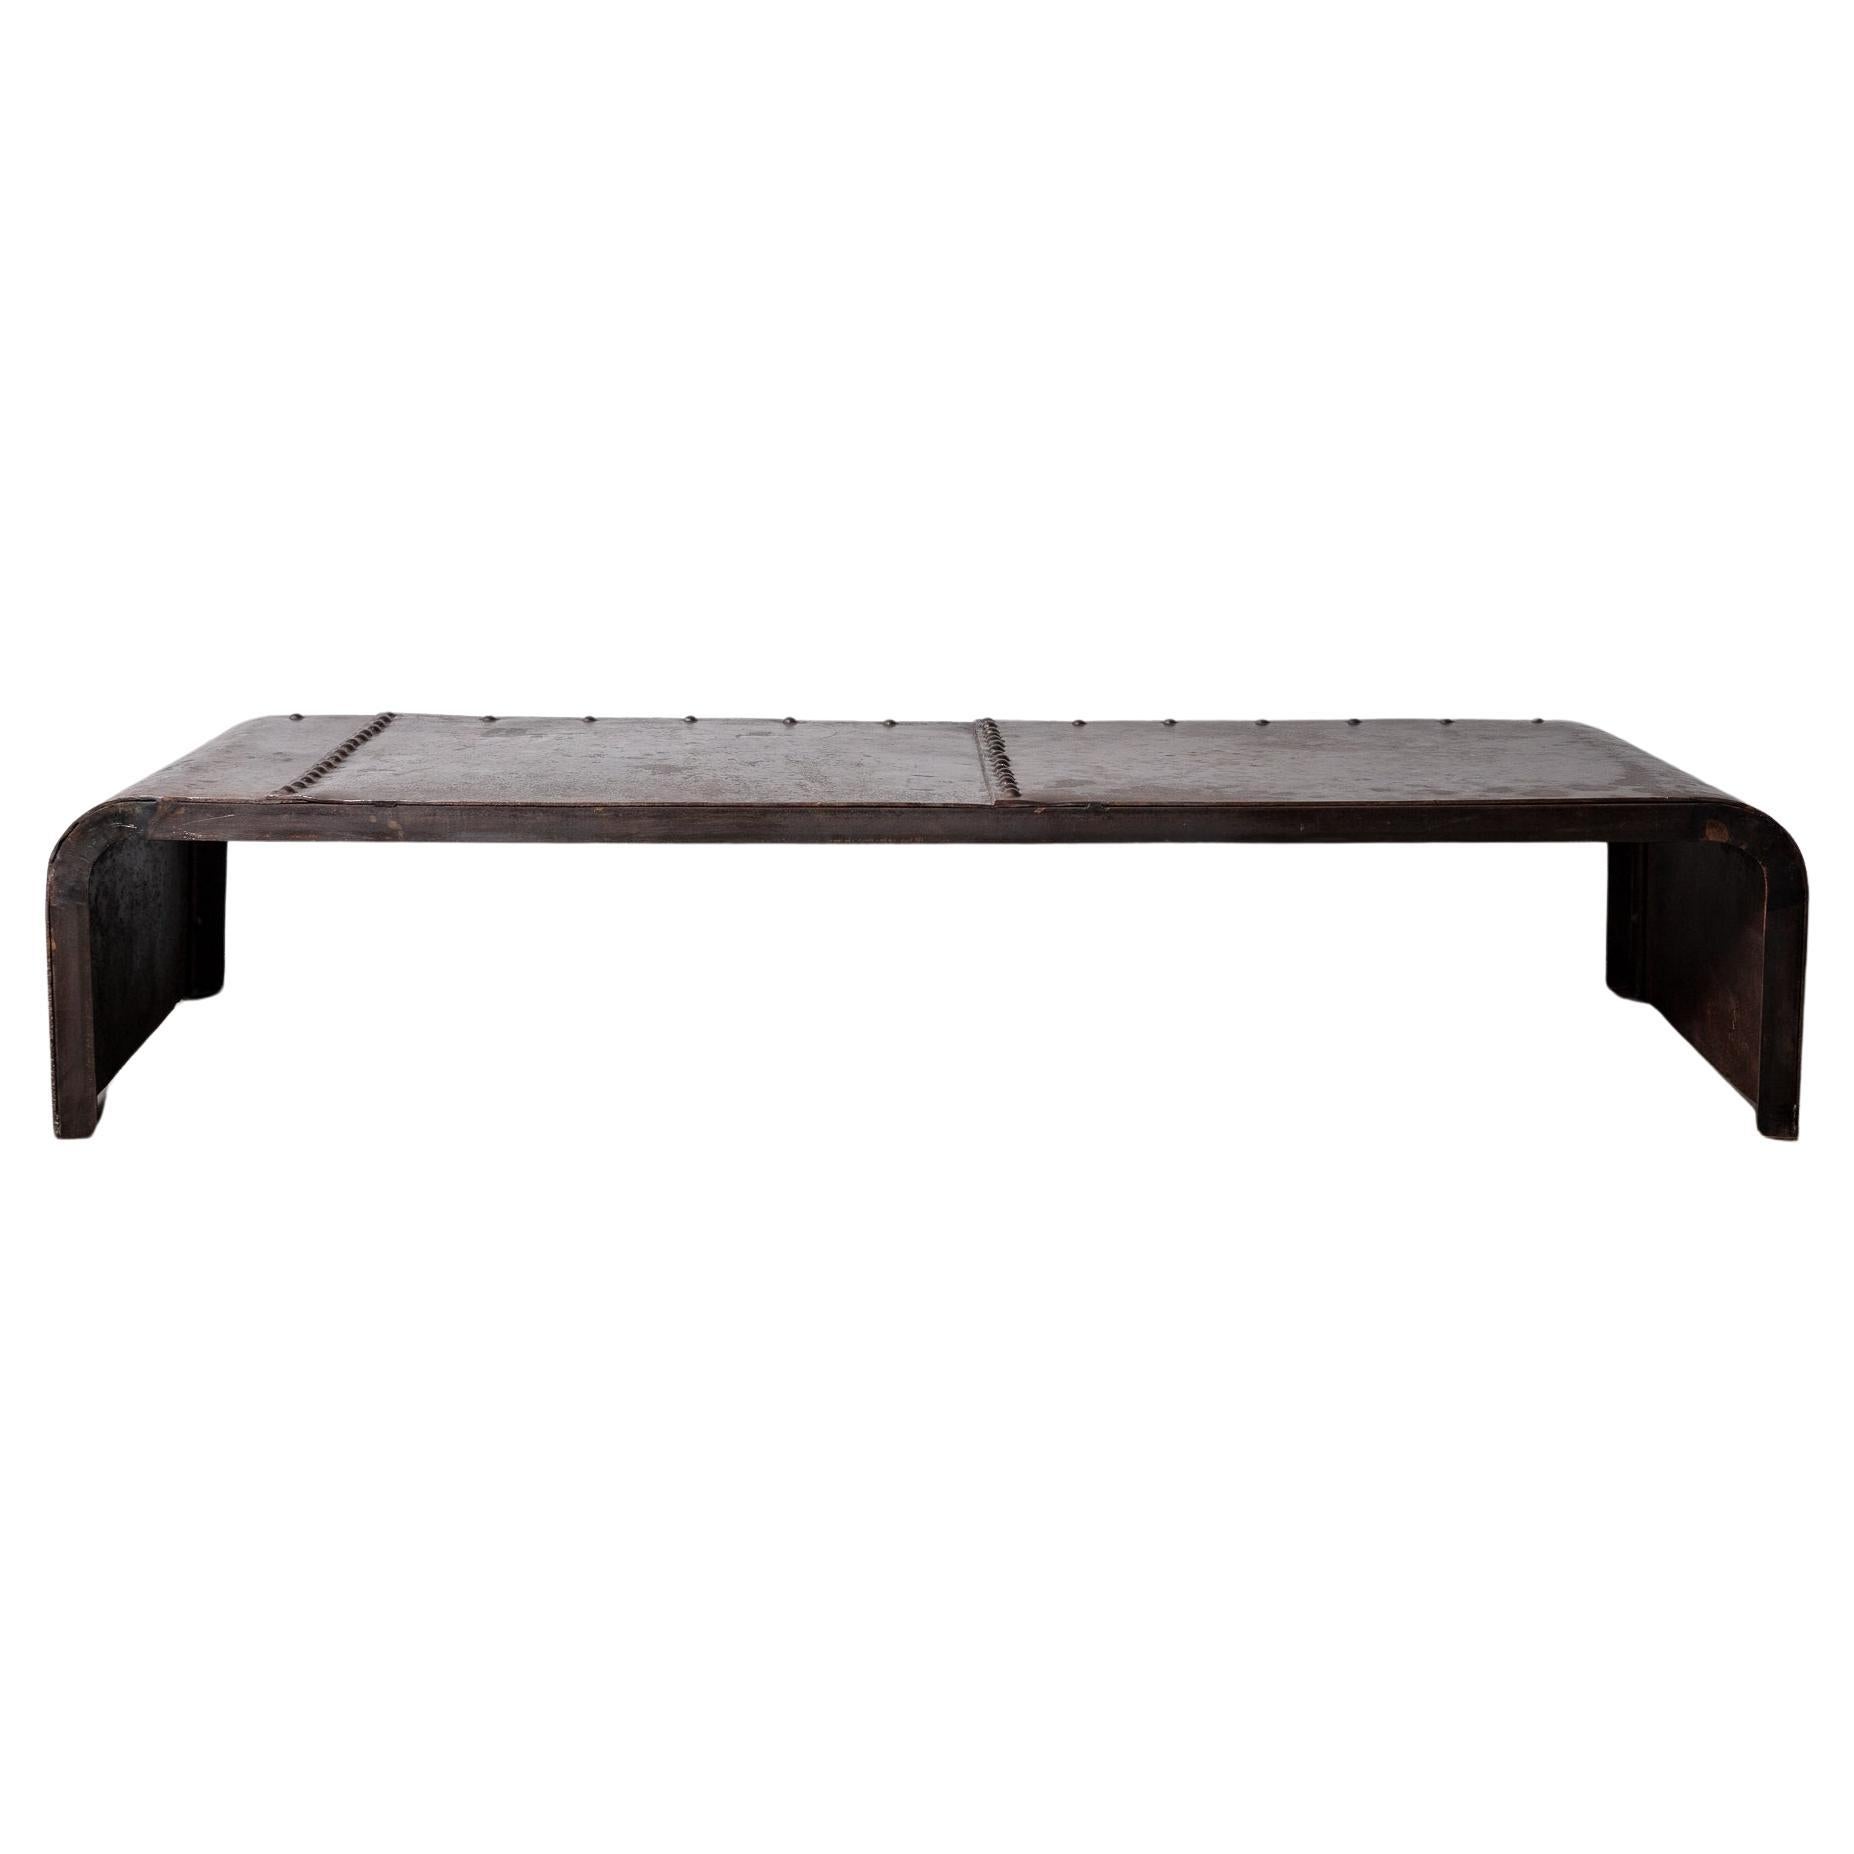 1900s French Iron Waterfall Coffee Table For Sale